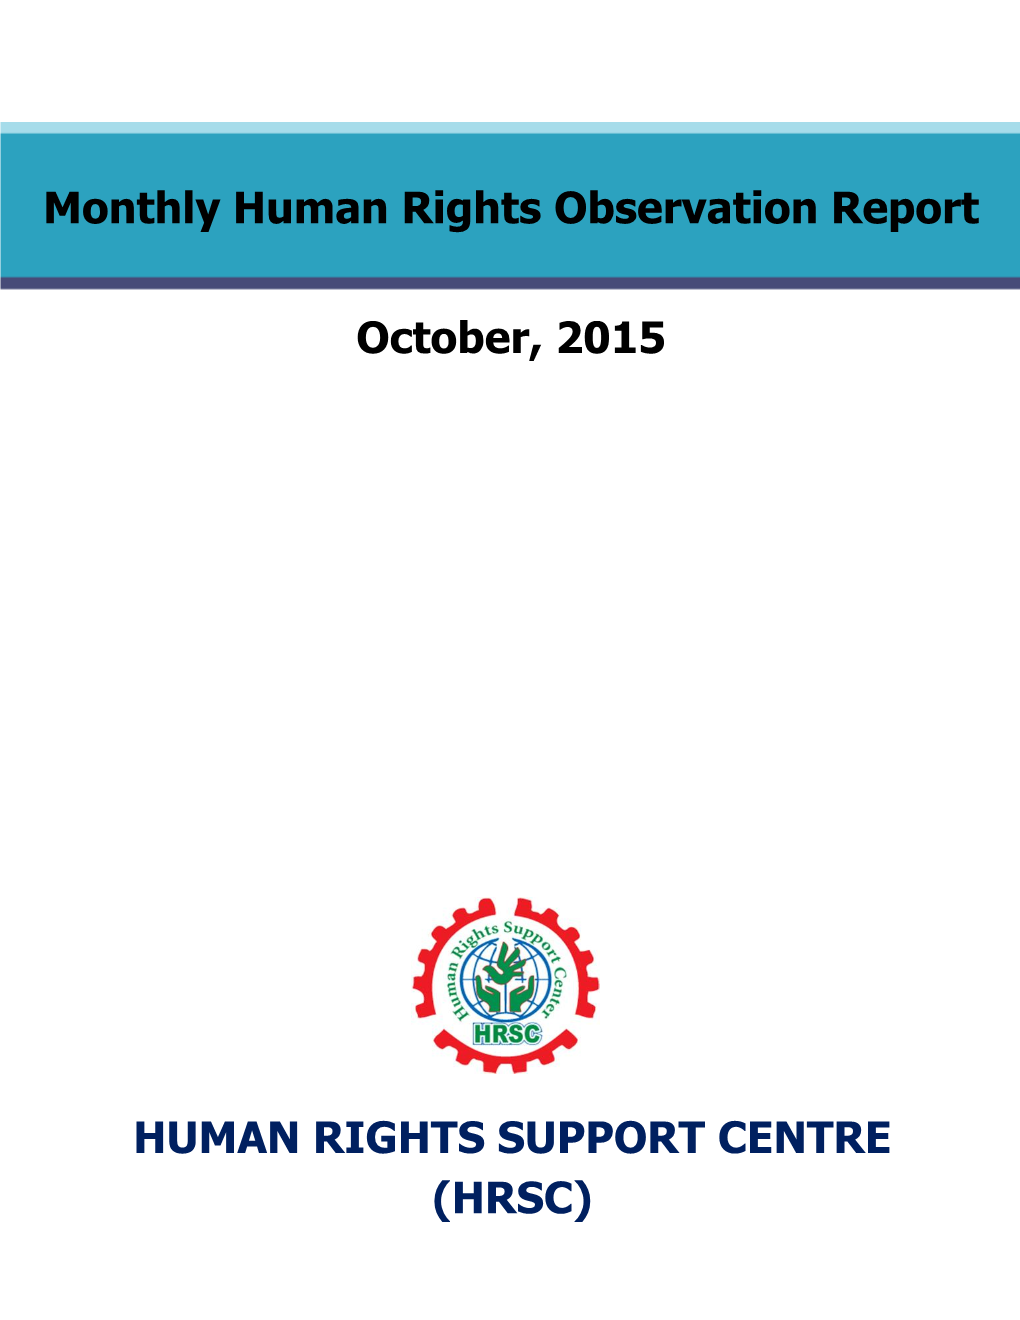 Monthly Human Rights Observation Report October'15